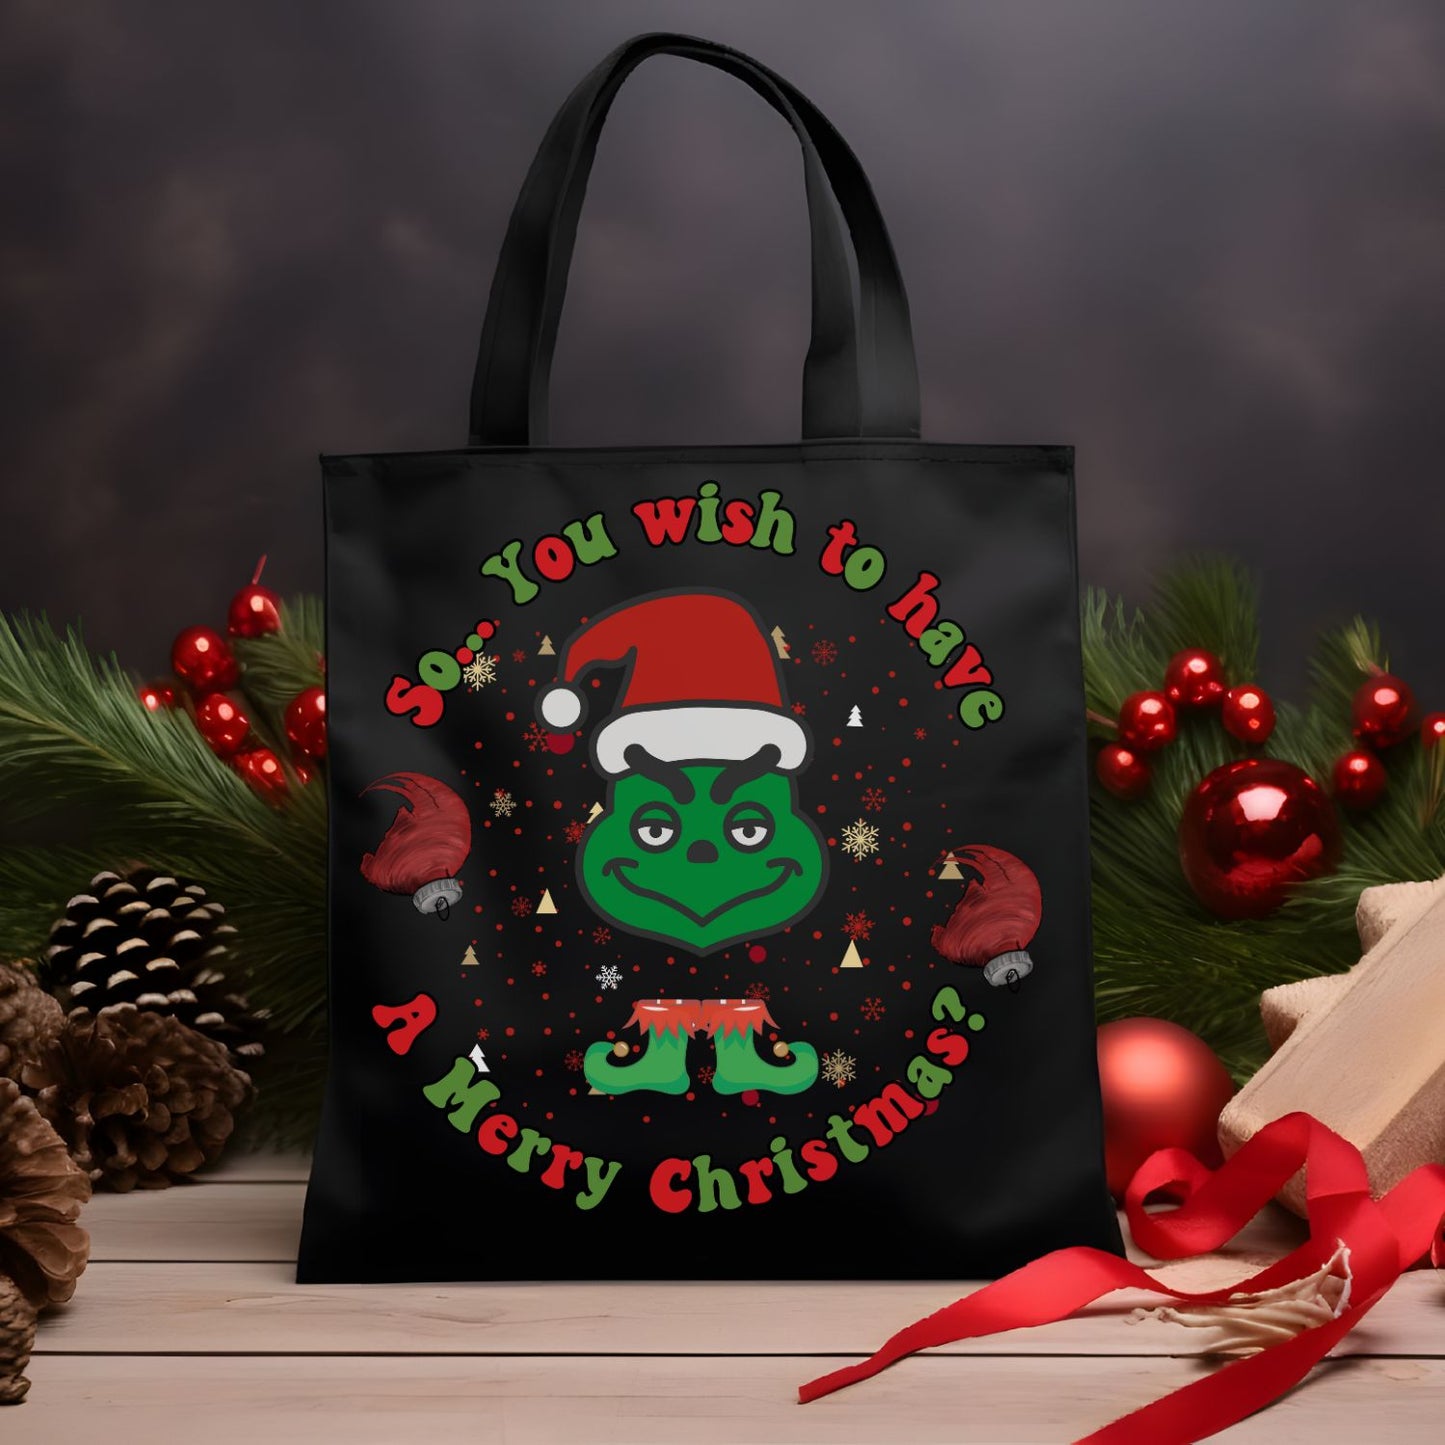 Christmas Tote Bag | Grinchmas Family Gift | Holiday Tote for Festive Fashion Accessories   